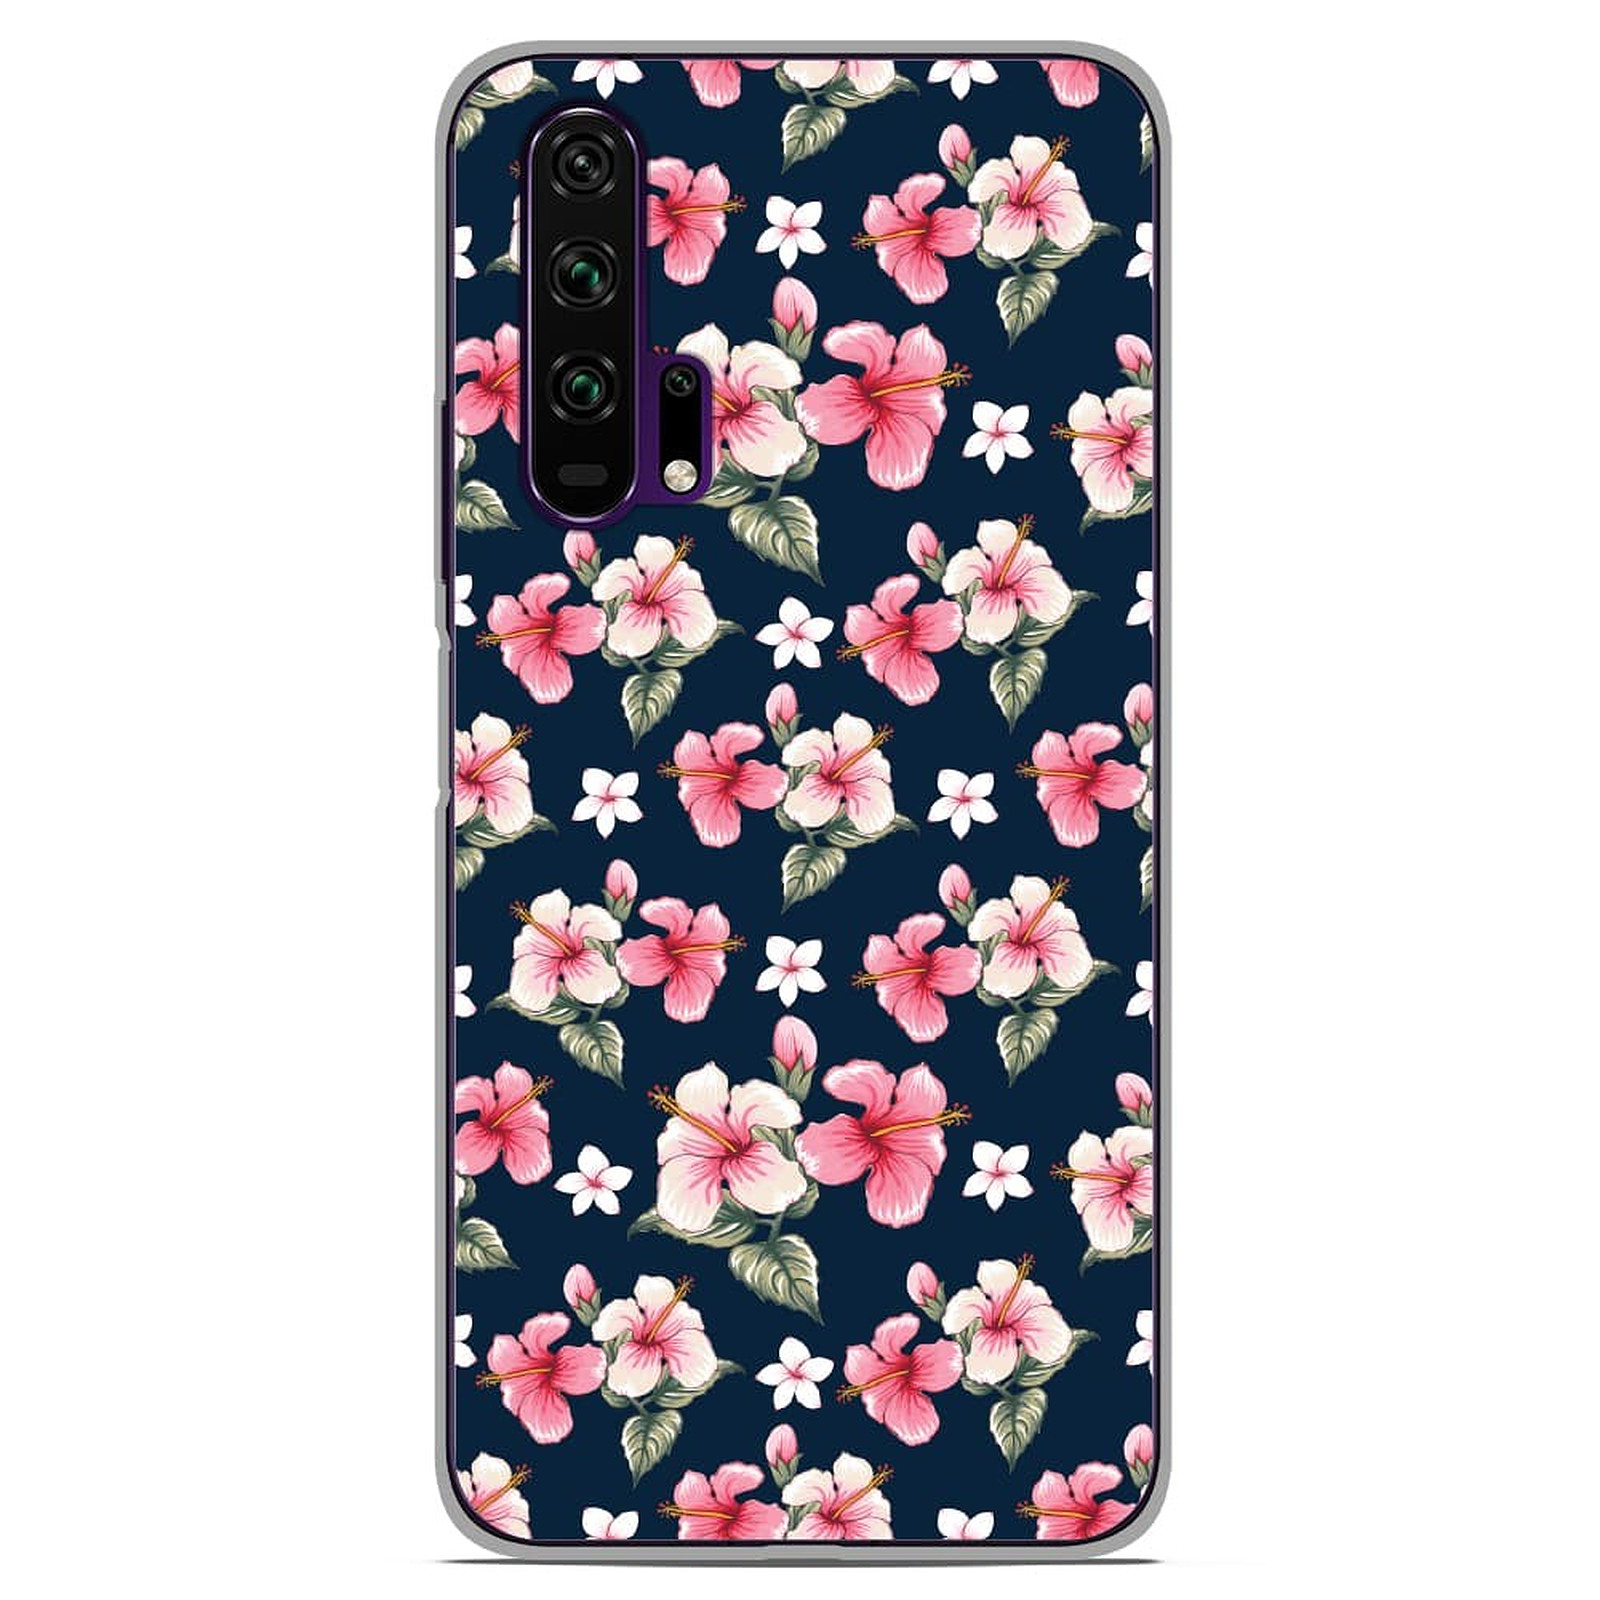 1001 Coques Coque silicone gel Huawei Honor 20 Pro motif Hibiscus Vintage - Coque telephone 1001Coques